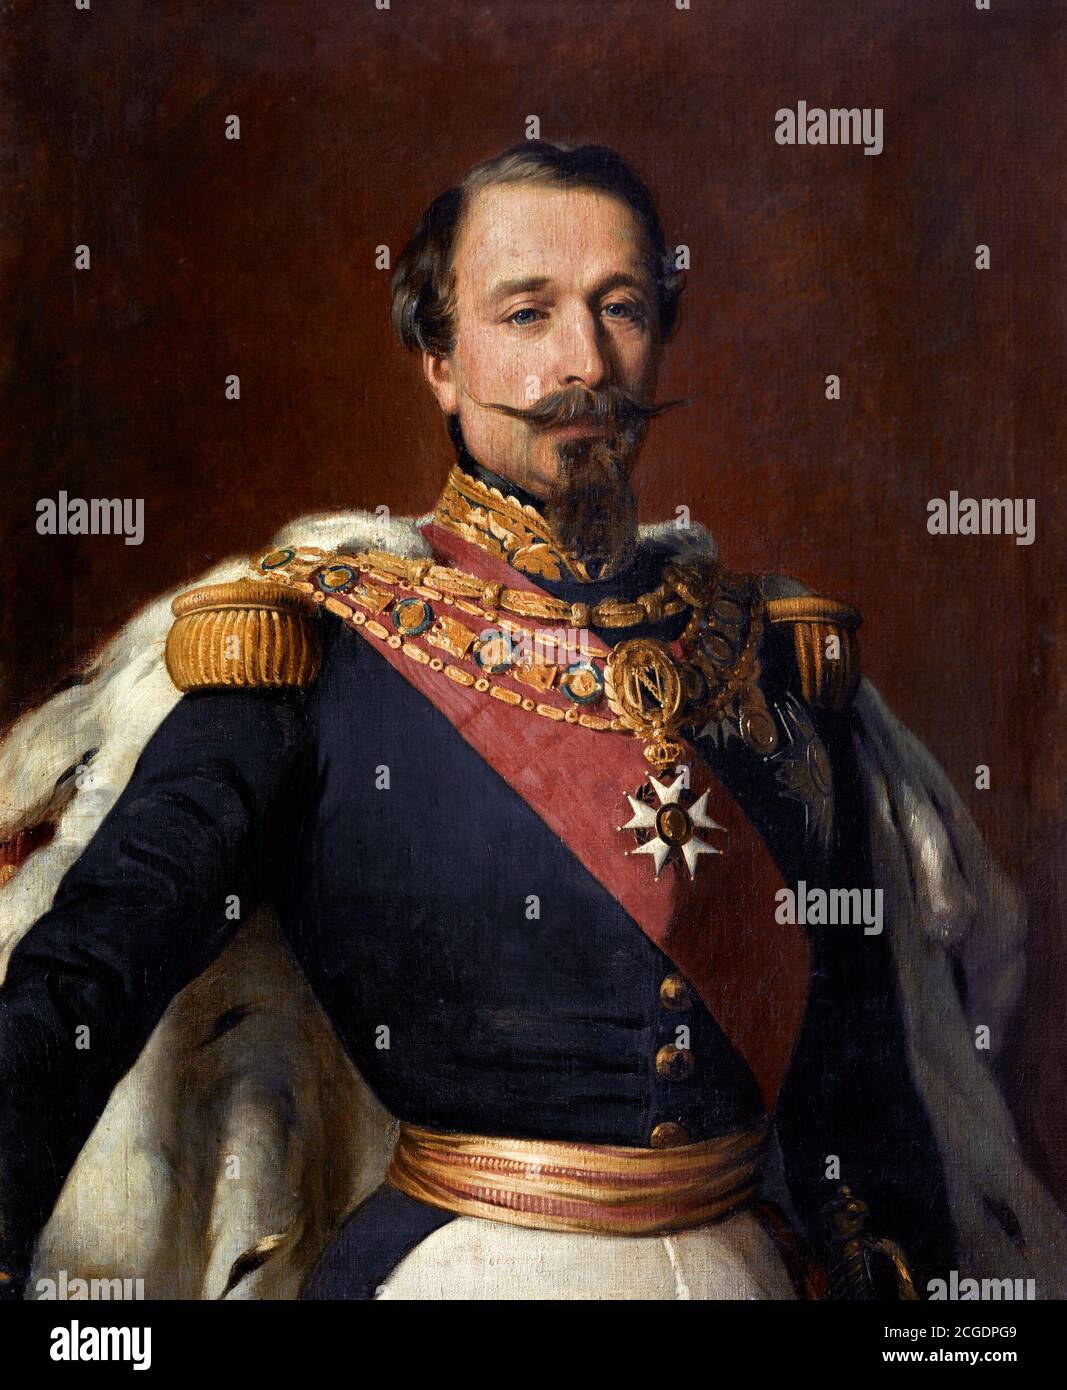 Napoleon III by Auguste PèreBoulard after Franz Winterhalter, oil on canvas, 1855. Portrait of Charles-Louis Napoléon Bonaparte (1808-1873), the first president of France from 1848 to 1852, and the last French emperor from 1852 to 1870. Stock Photo